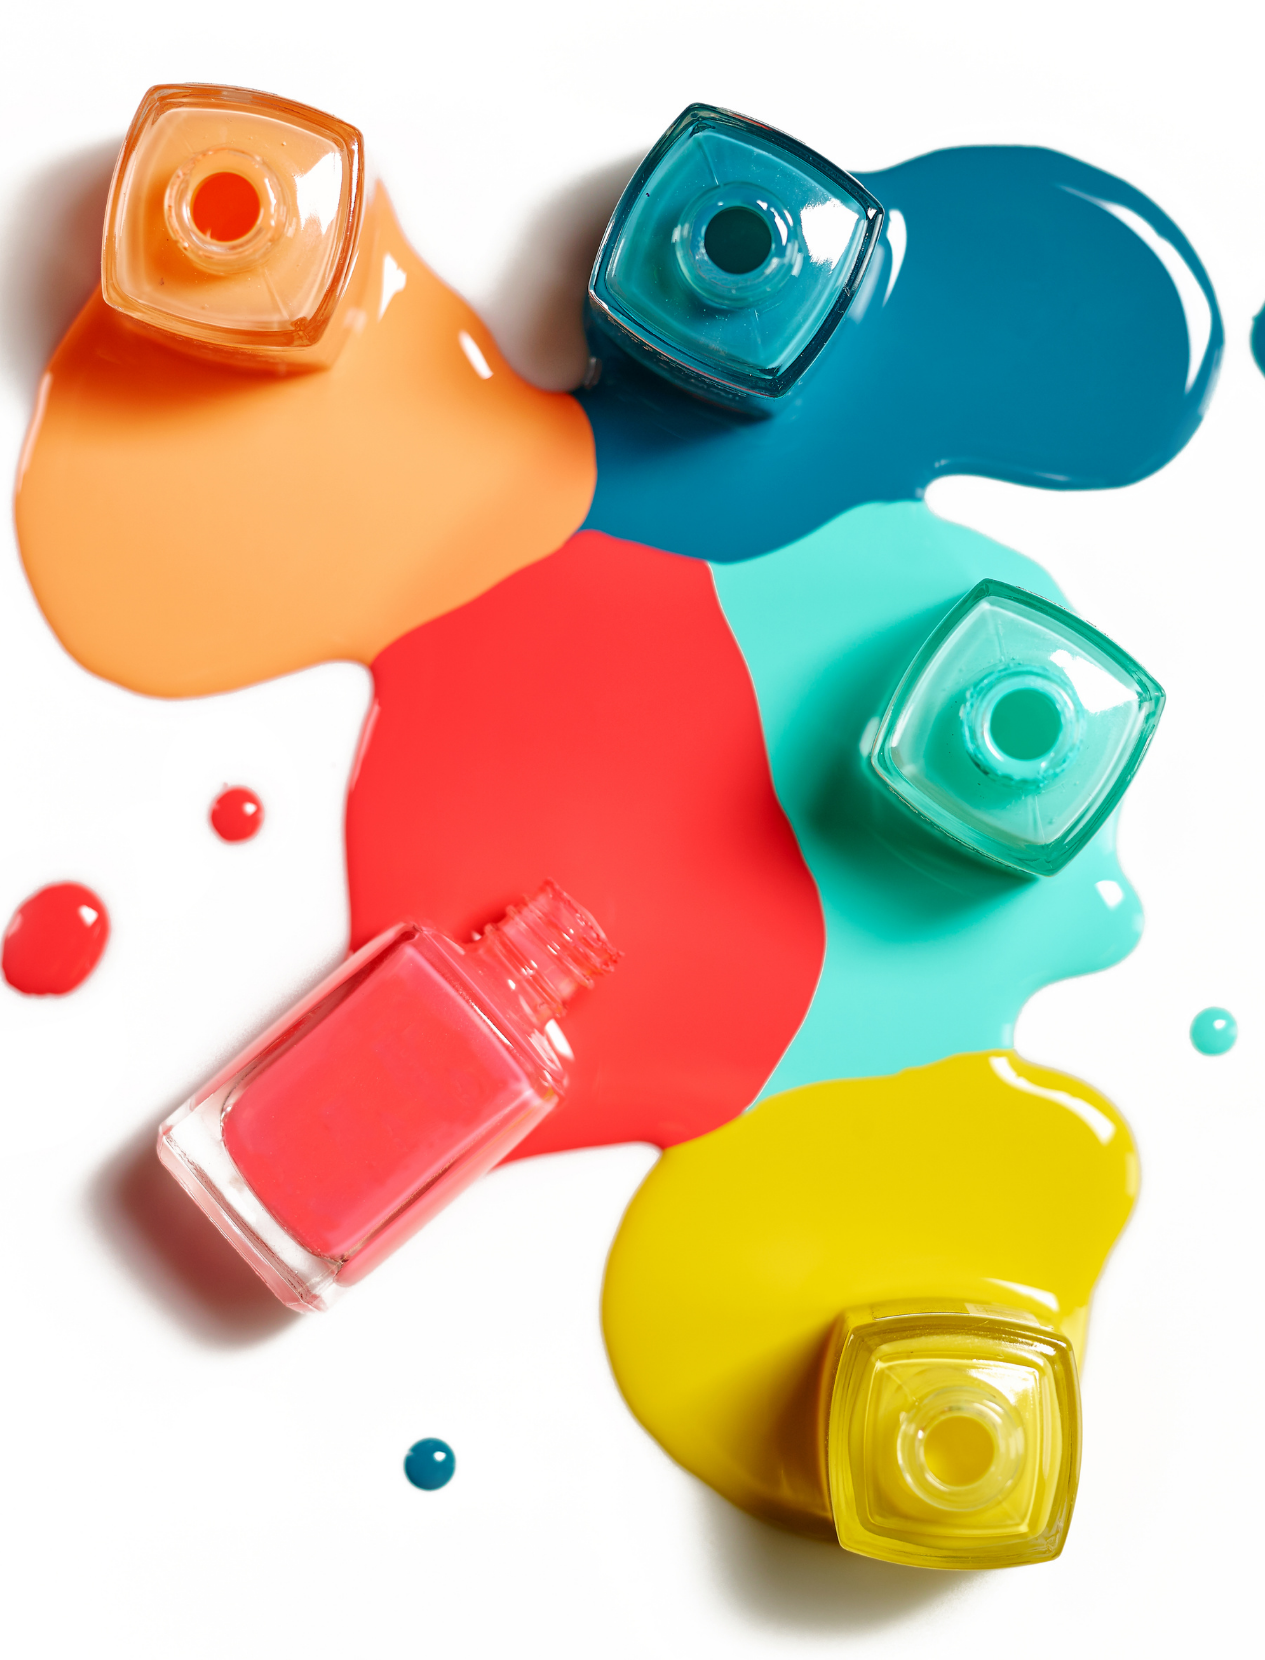 How to Get Nail Polish Out of Carpet - Stylish Life for Moms